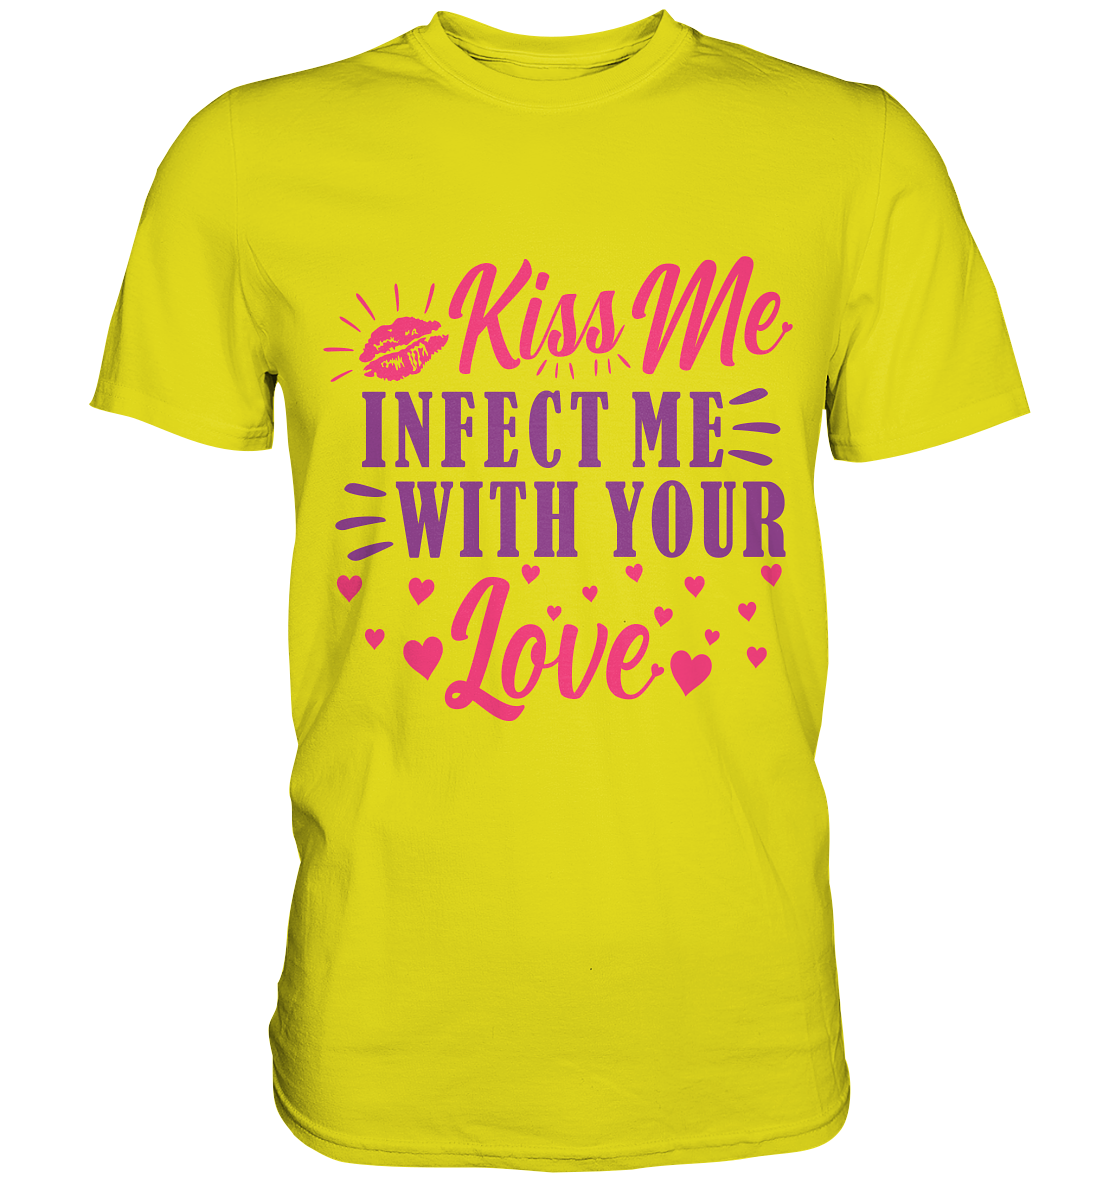 Kiss me infect me with your love - Premium Shirt